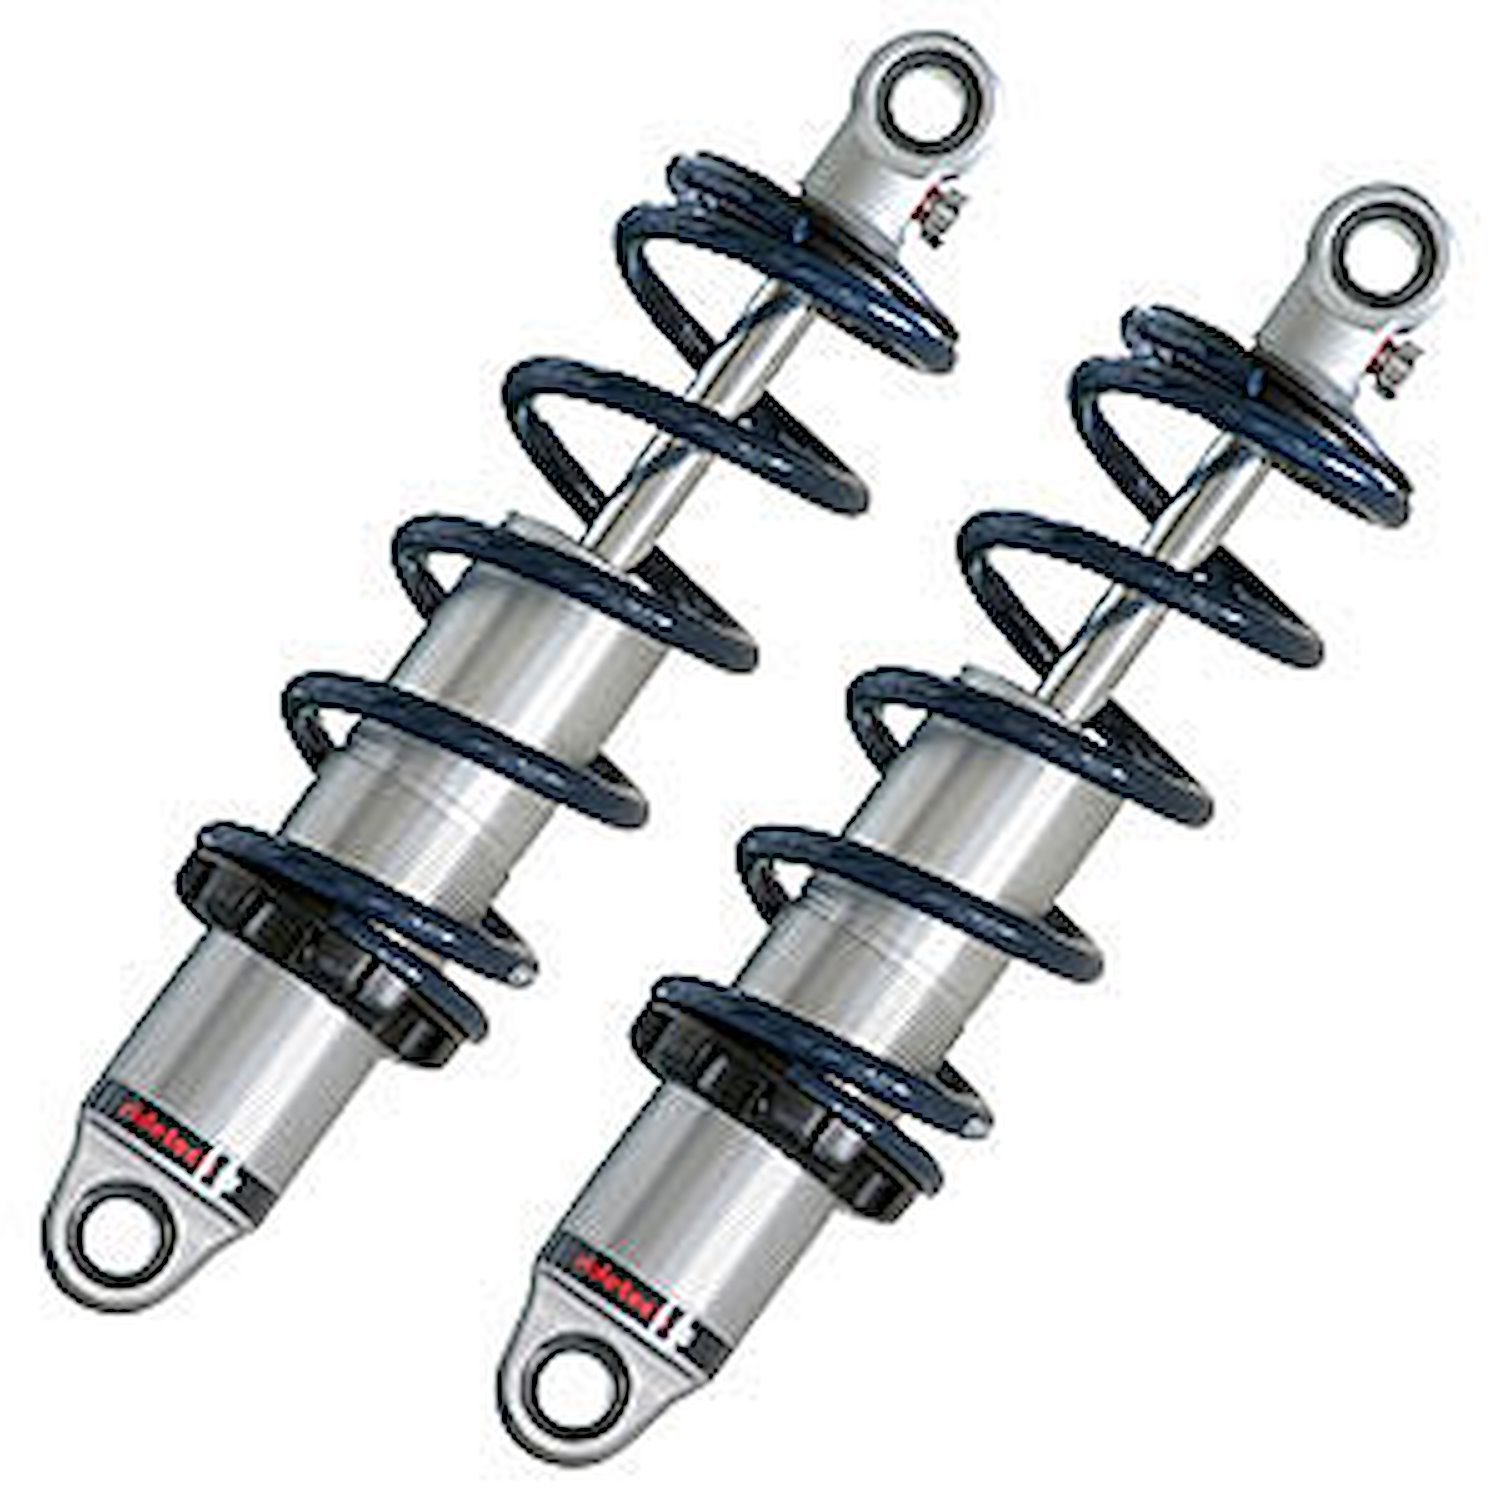 HQ Series Single-Adjustable Rear Coil-Over Shocks 1968-1974 Chevy